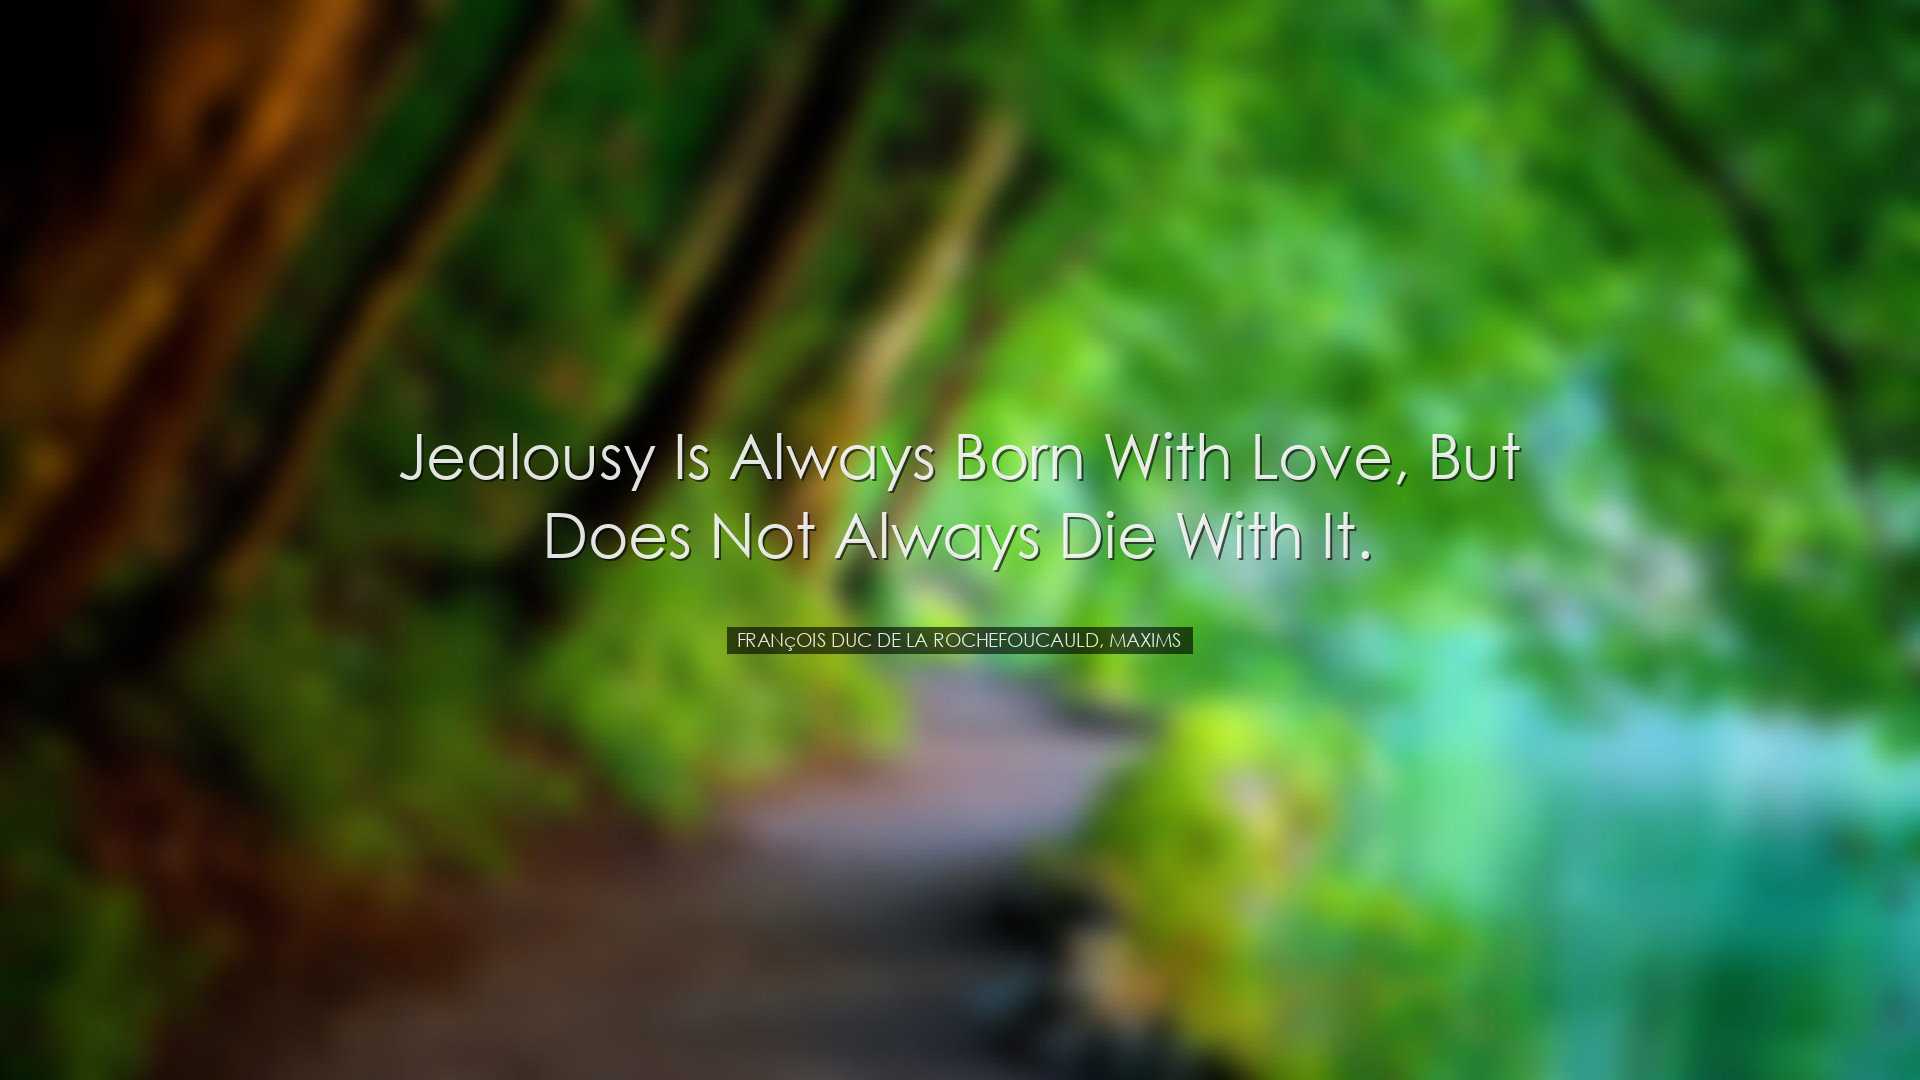 Jealousy is always born with love, but does not always die with it